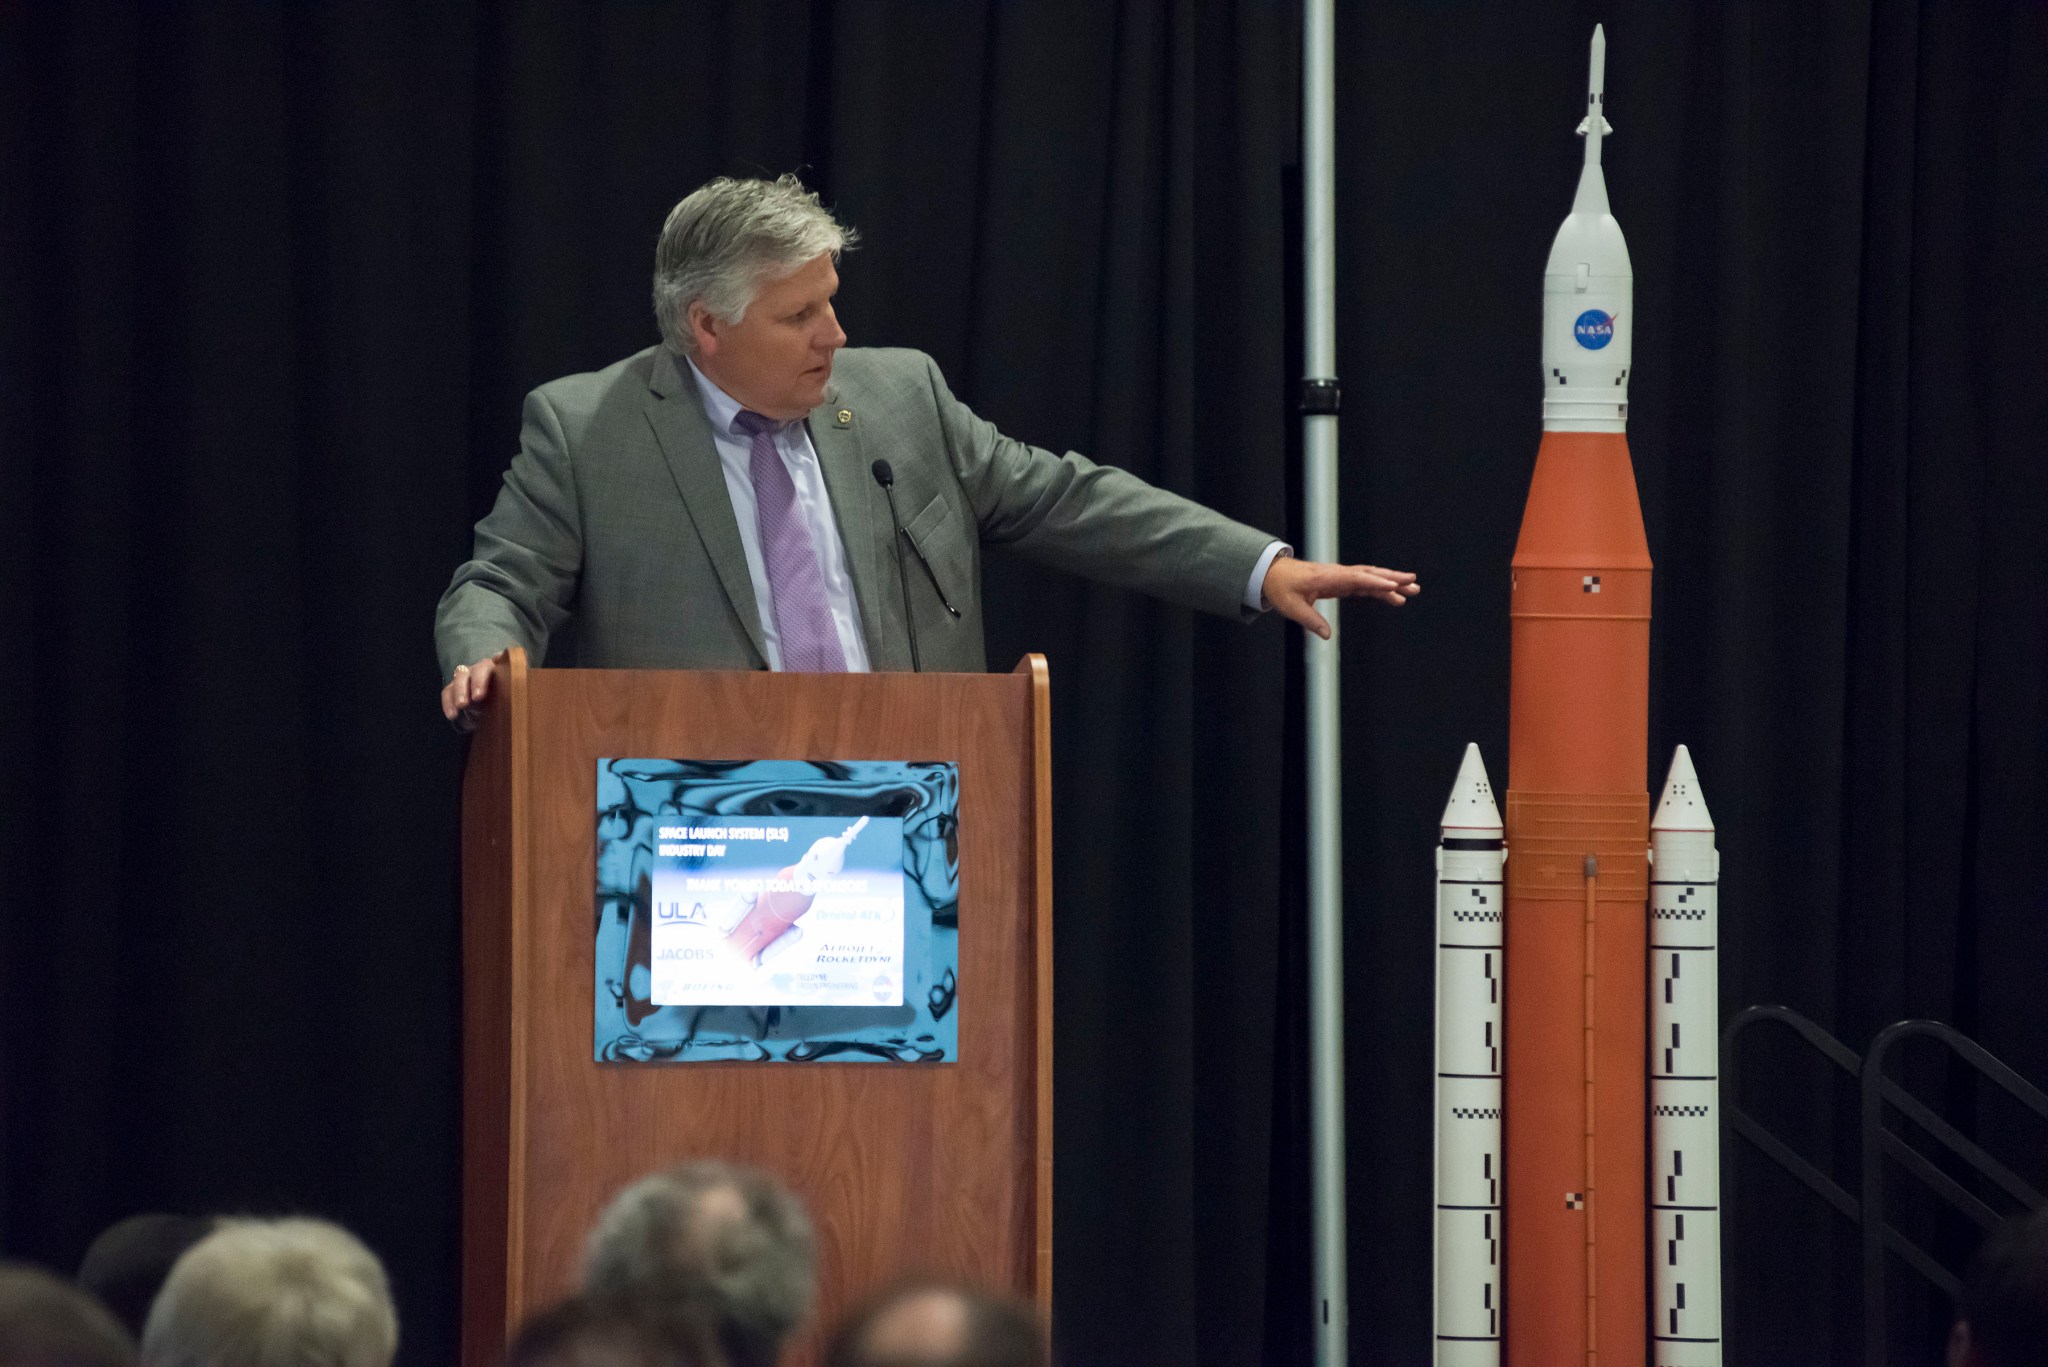 Jim Turner, a manager for NASA's Space Launch System stages office